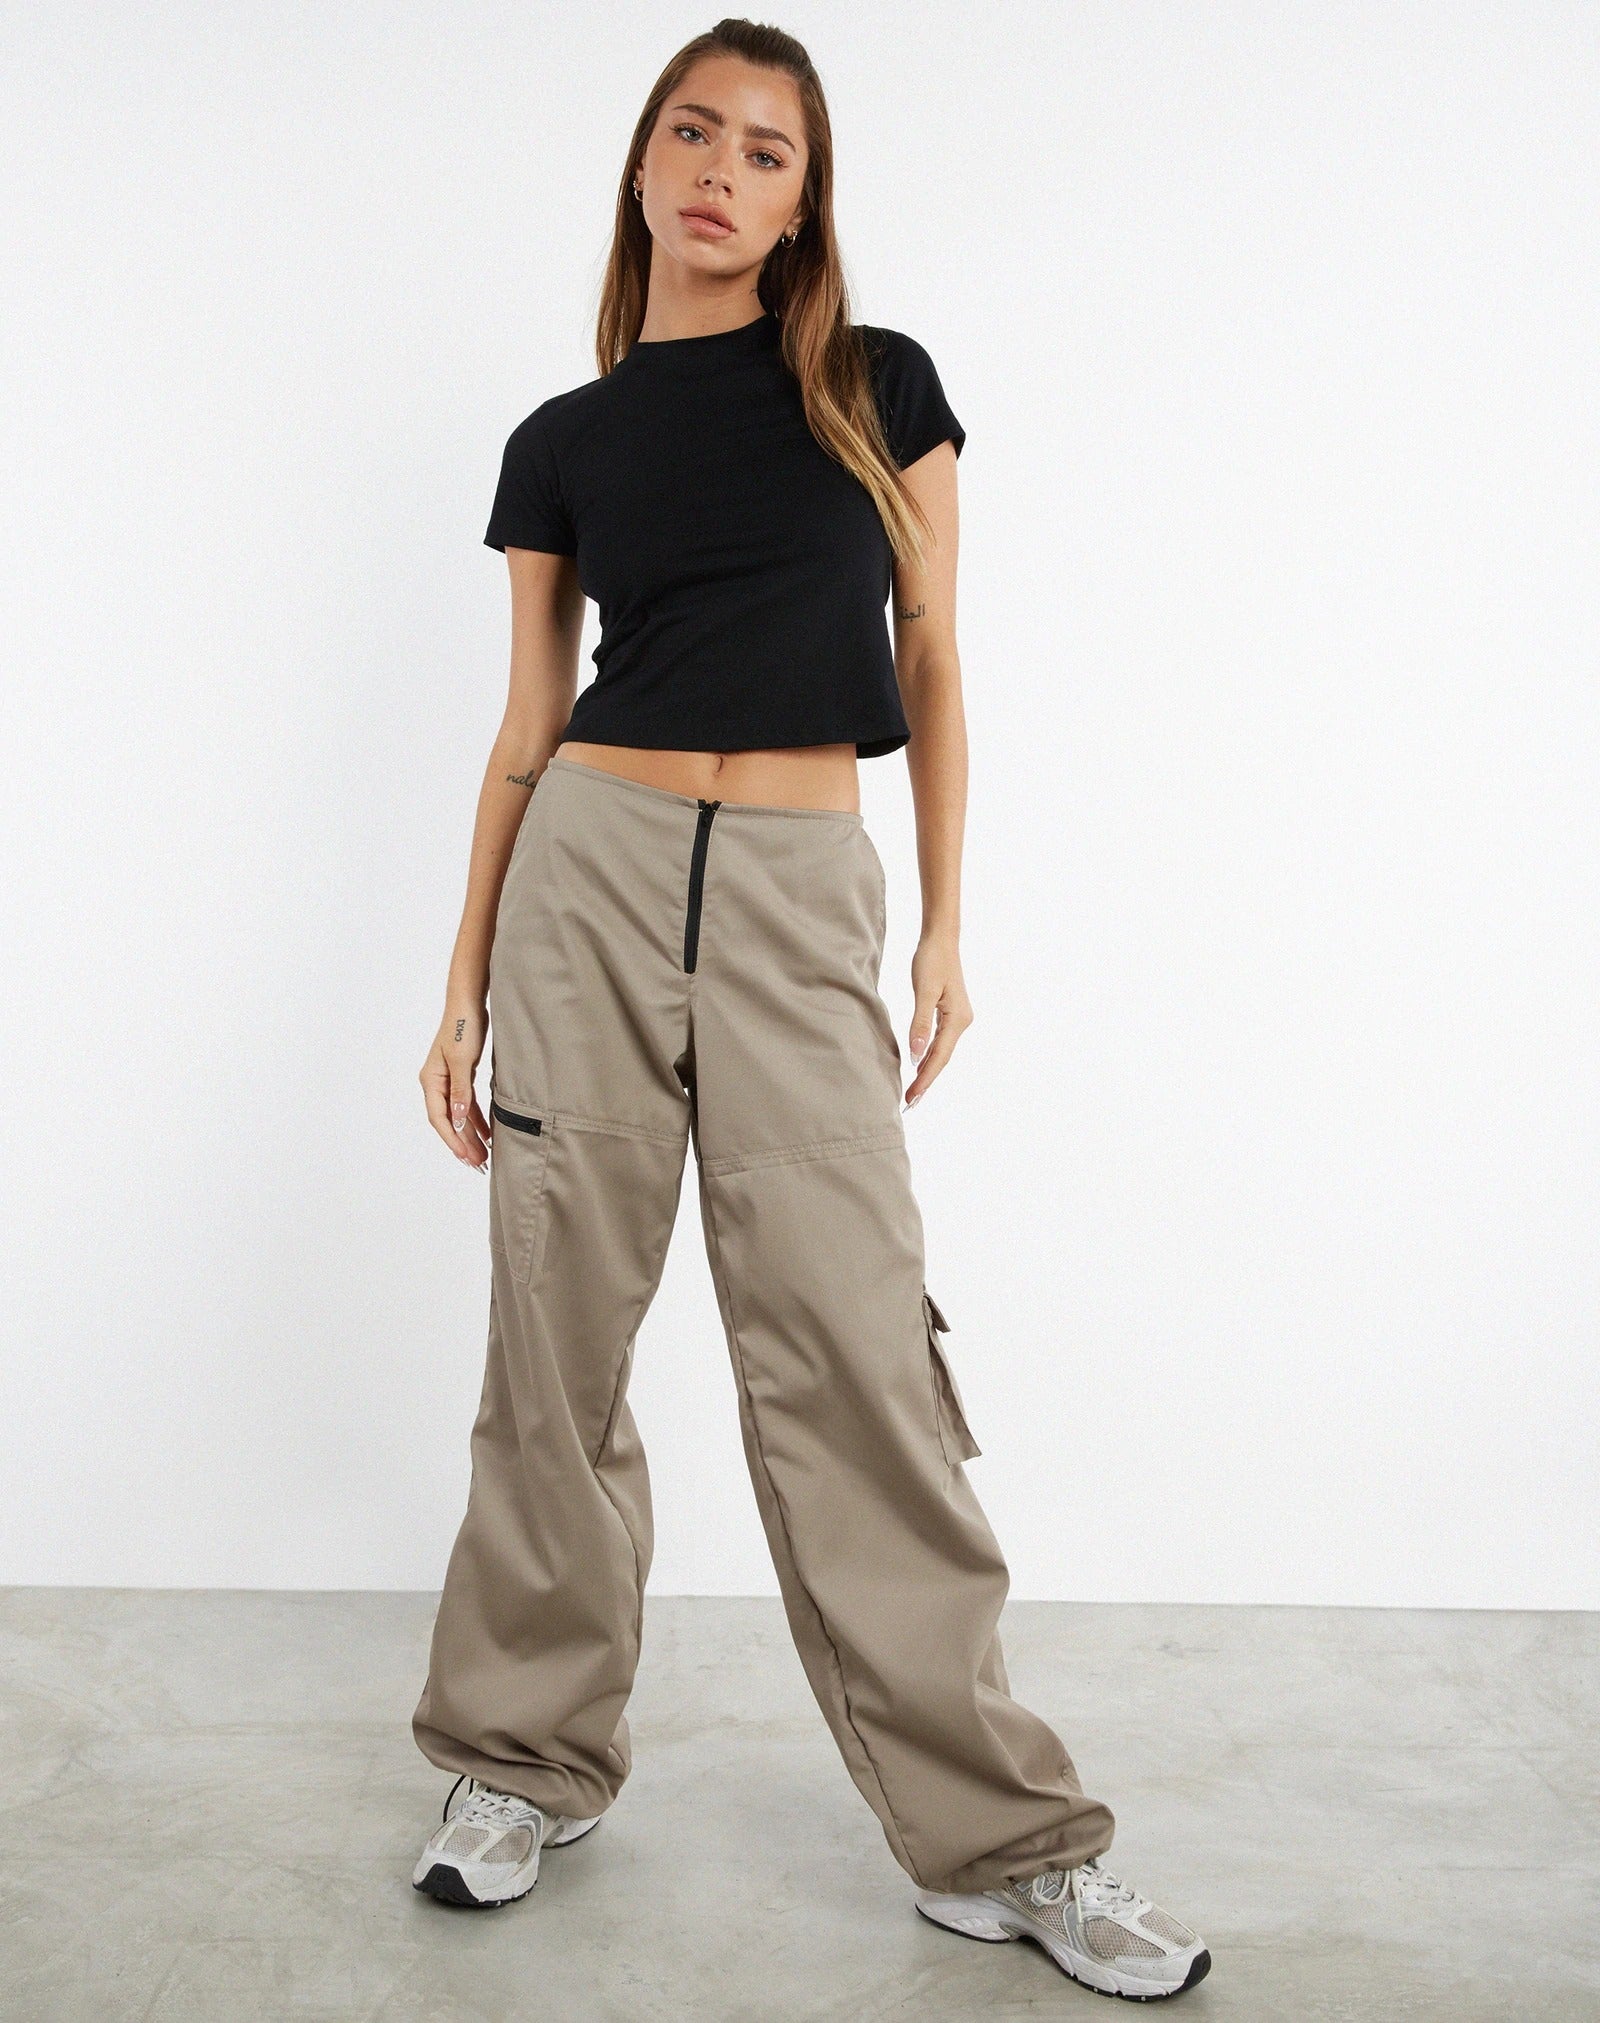 Pants & Jeans For Women: Mom, Cargo, Joggers & More | DKNY